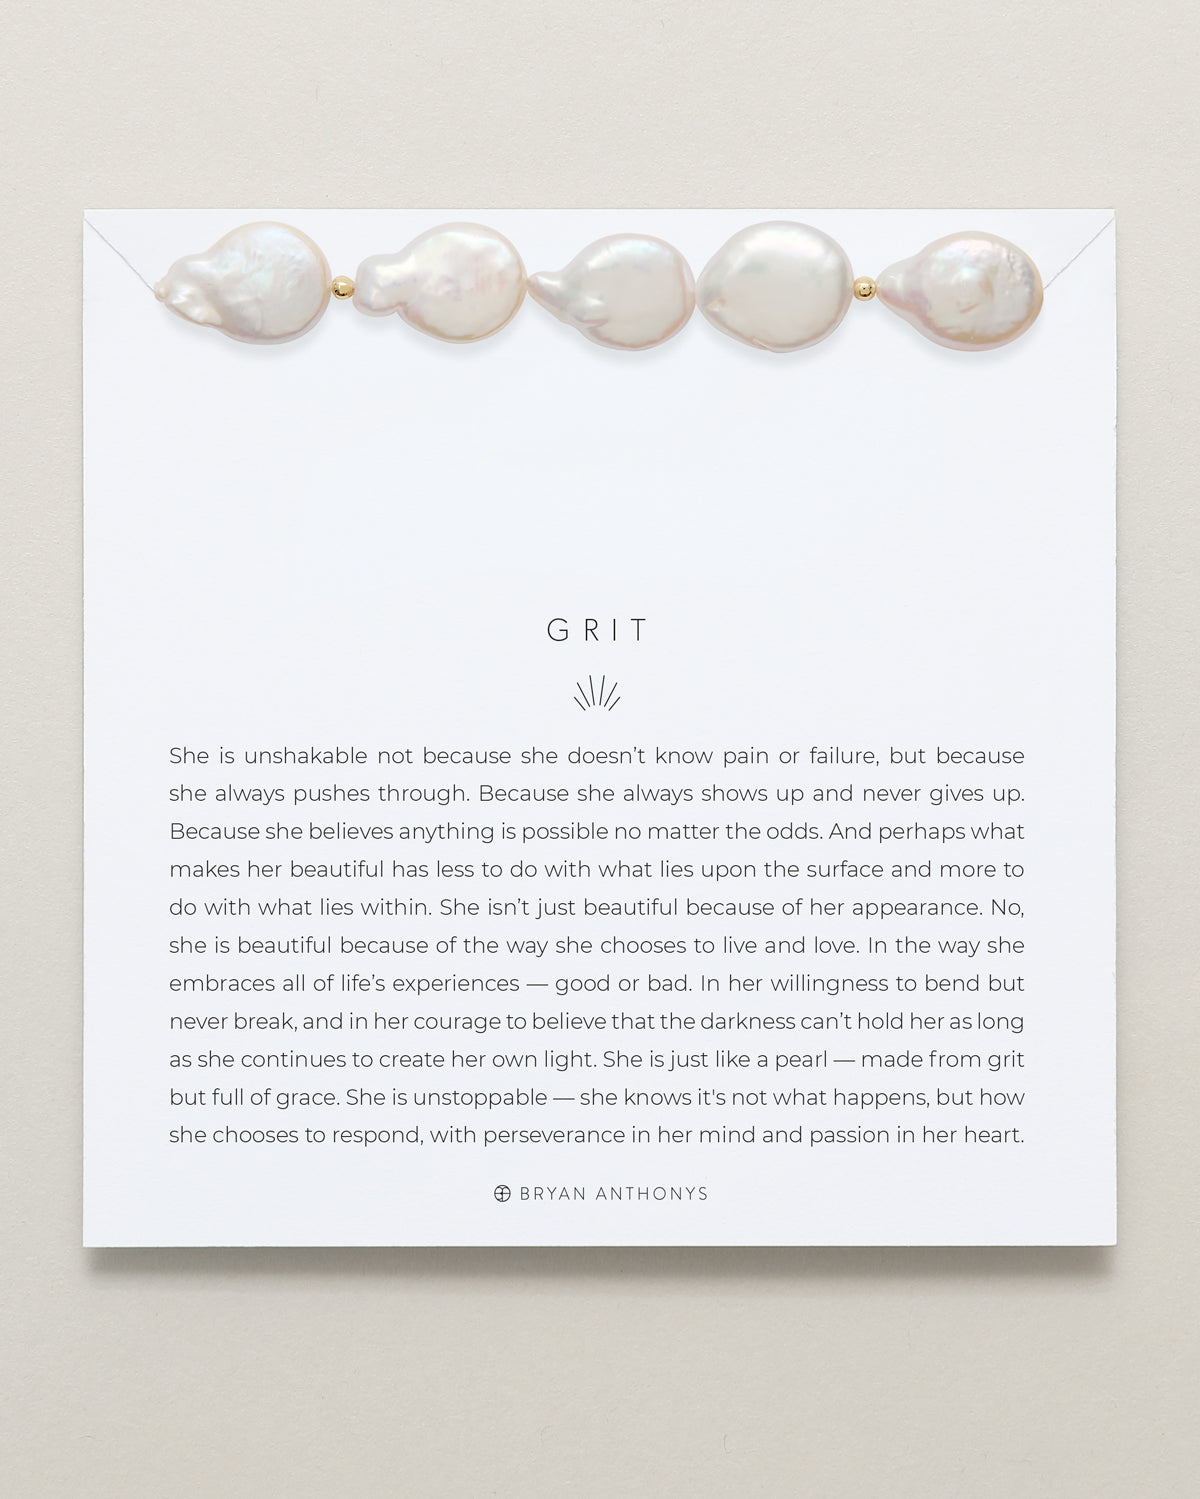 Bryan Anthonys Grit Pearl Statement Necklace Gold On Card